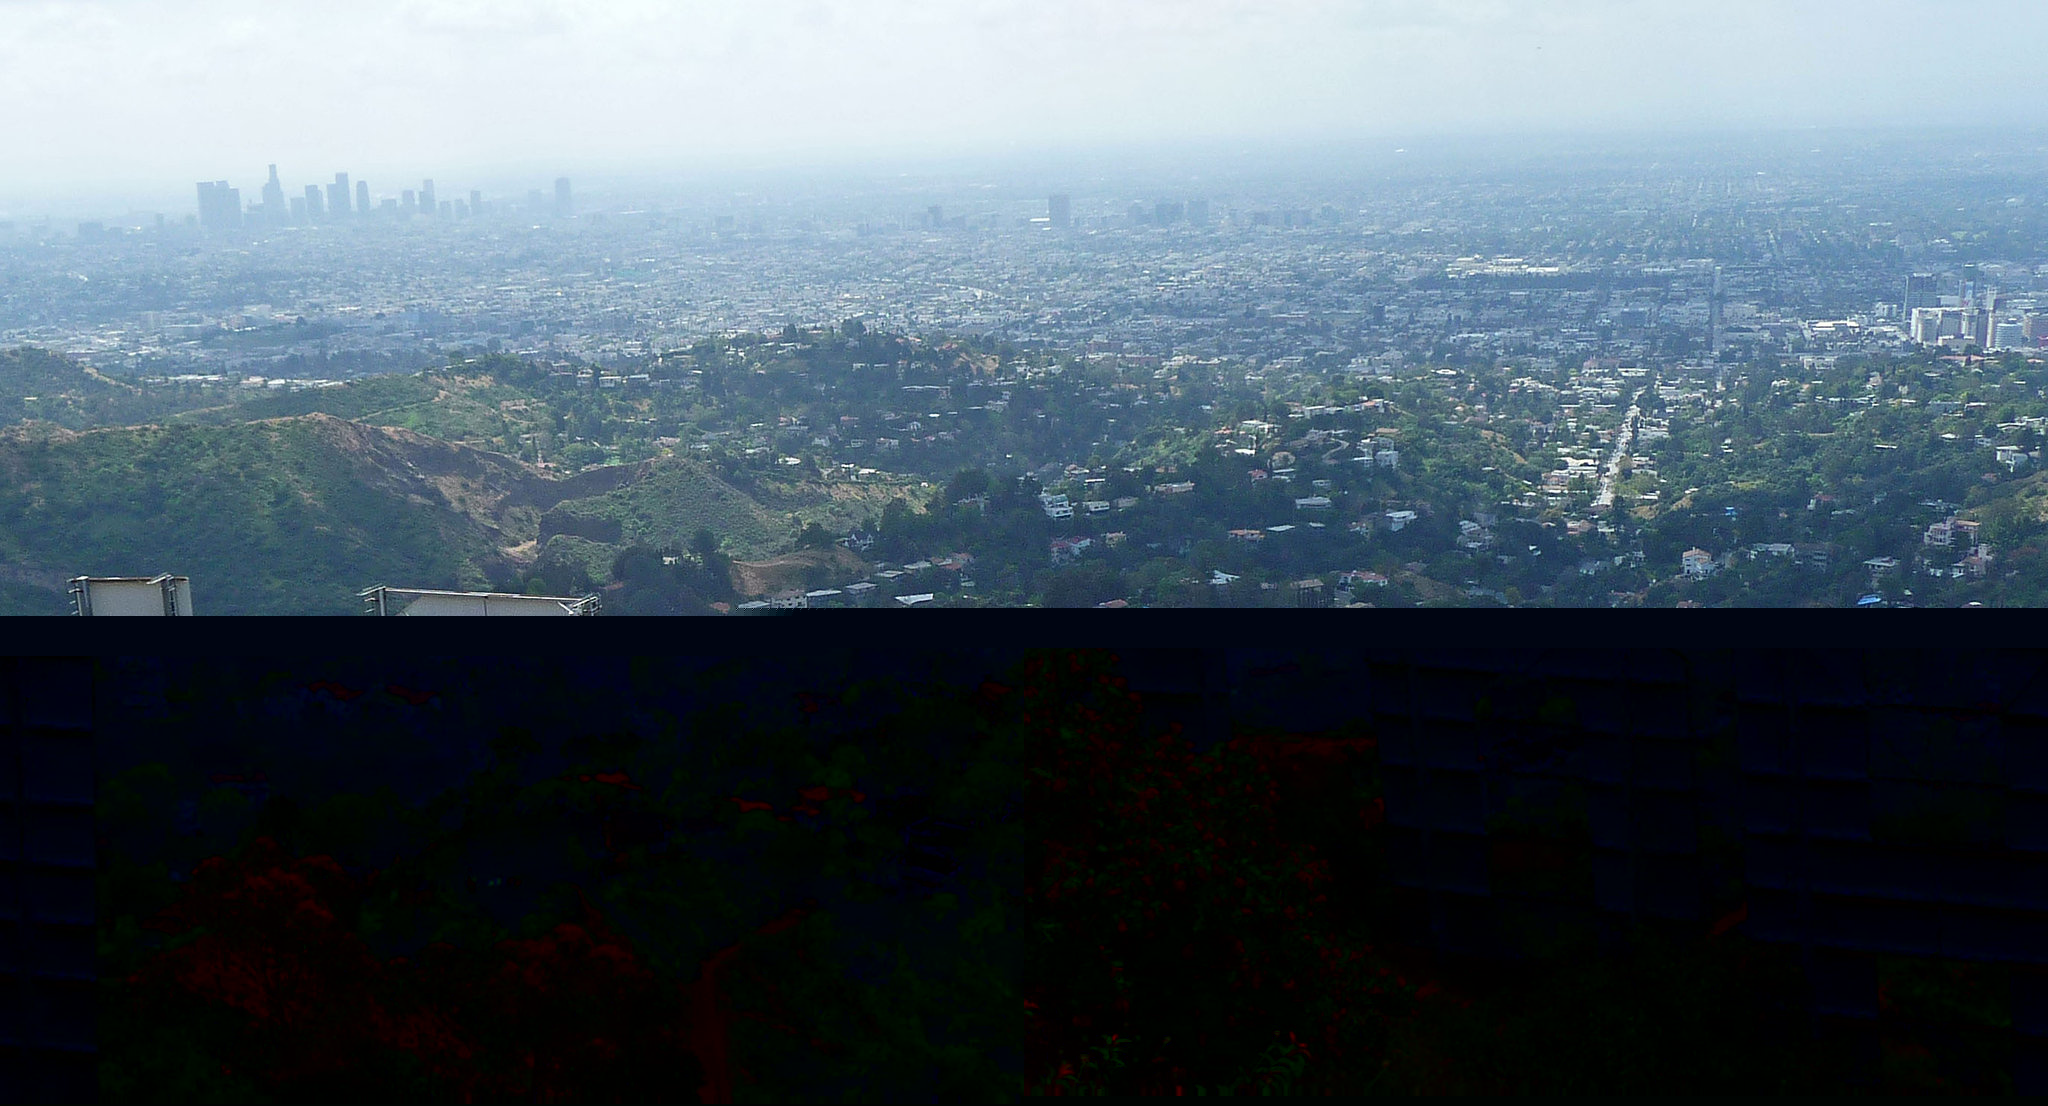 Hollywood Sign (3980)